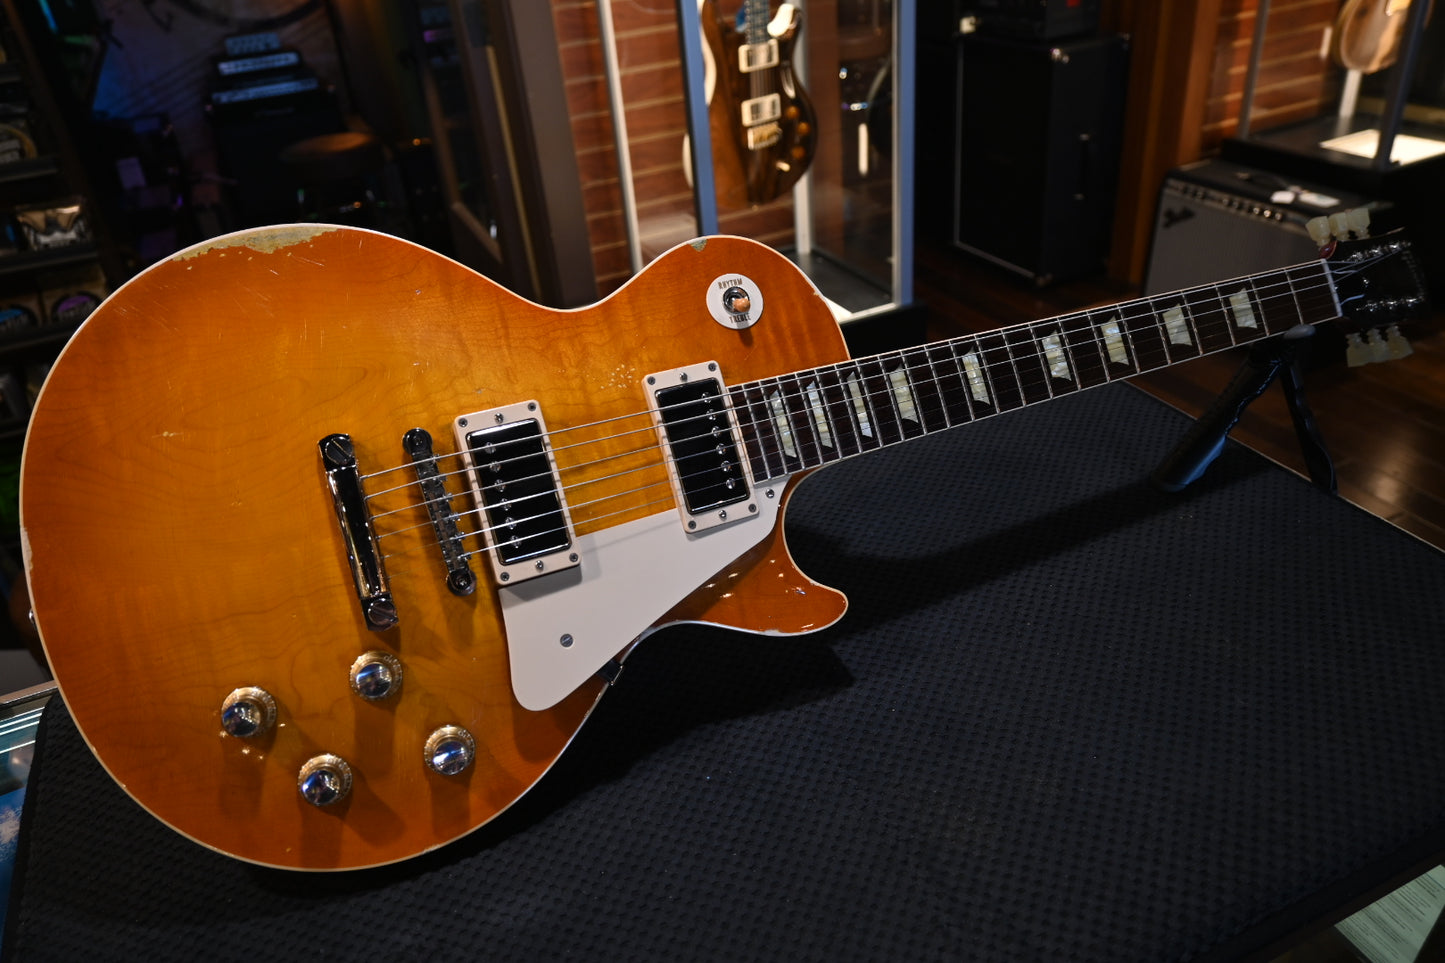 Gibson 2014 Custom Shop Les Paul 60’s Re-issue - Heavy Relic Amber Burst Guitar #4093 PRE-OWNED - Danville Music